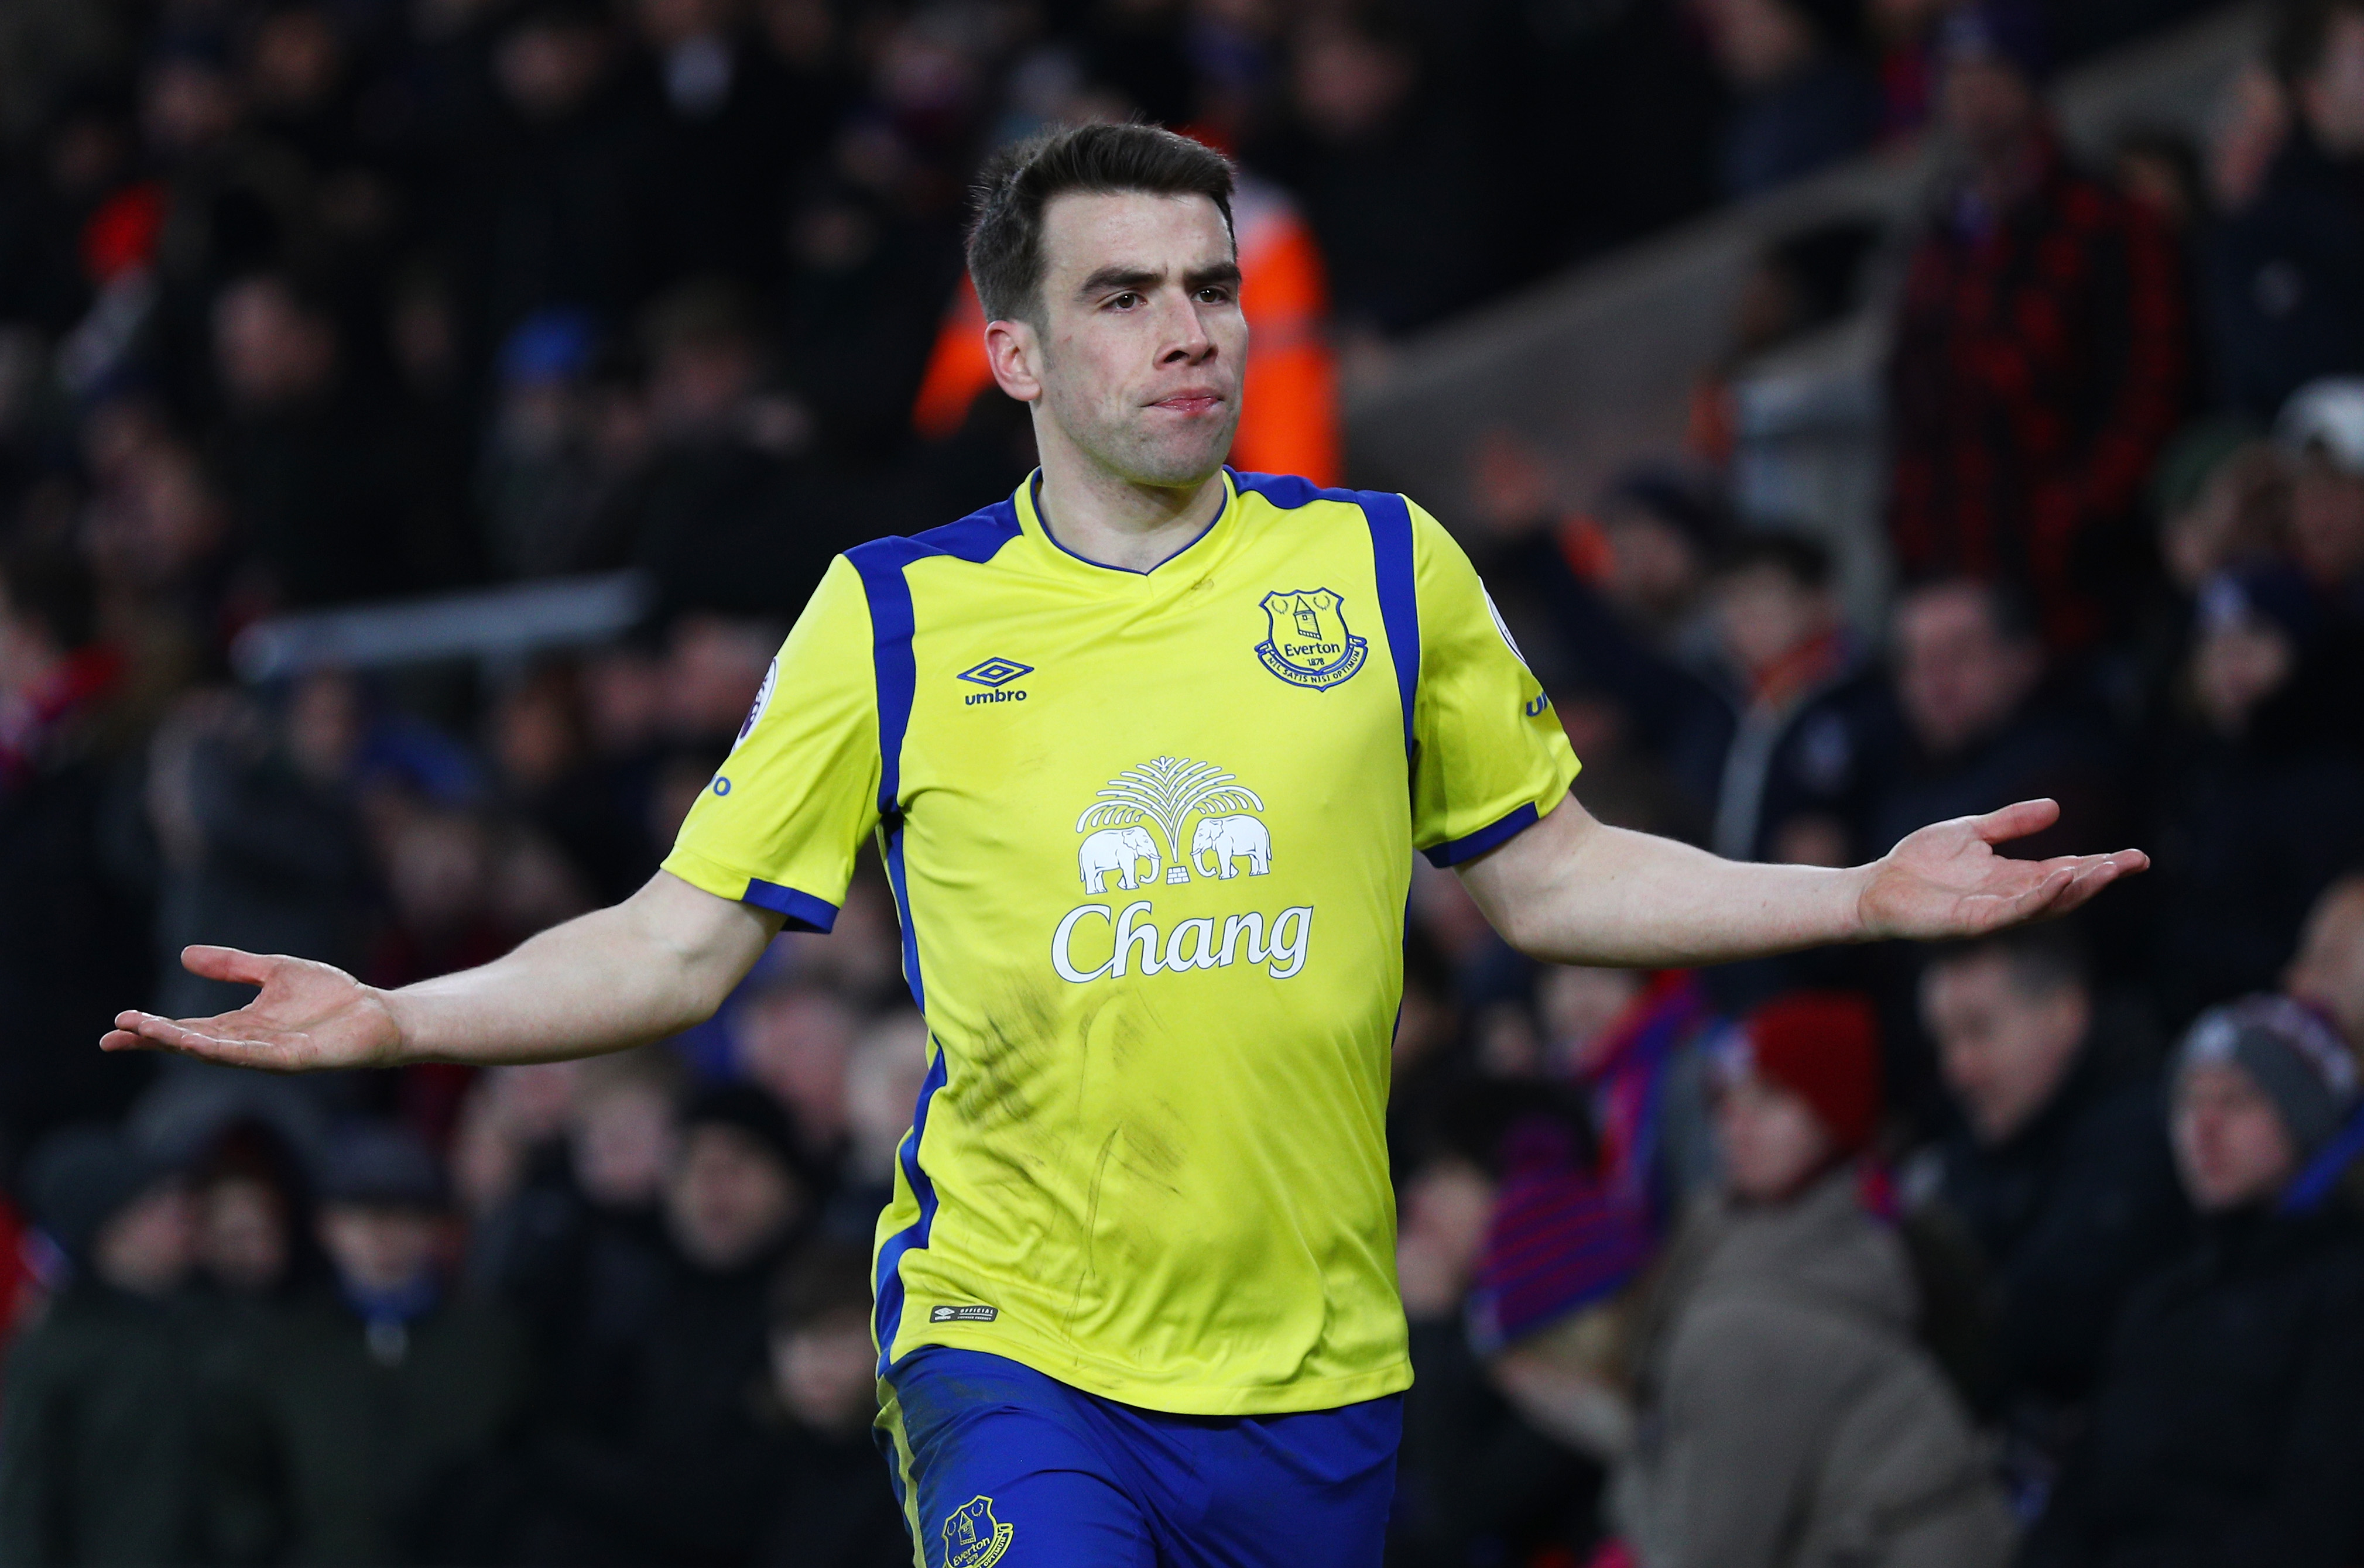 LONDON, ENGLAND - JANUARY 21: Seamus Coleman of Everton celebrates scoring his sides first goal during the Premier League match between Crystal Palace and Everton at Selhurst Park on January 21, 2017 in London, England.  (Photo by Ian Walton/Getty Images)